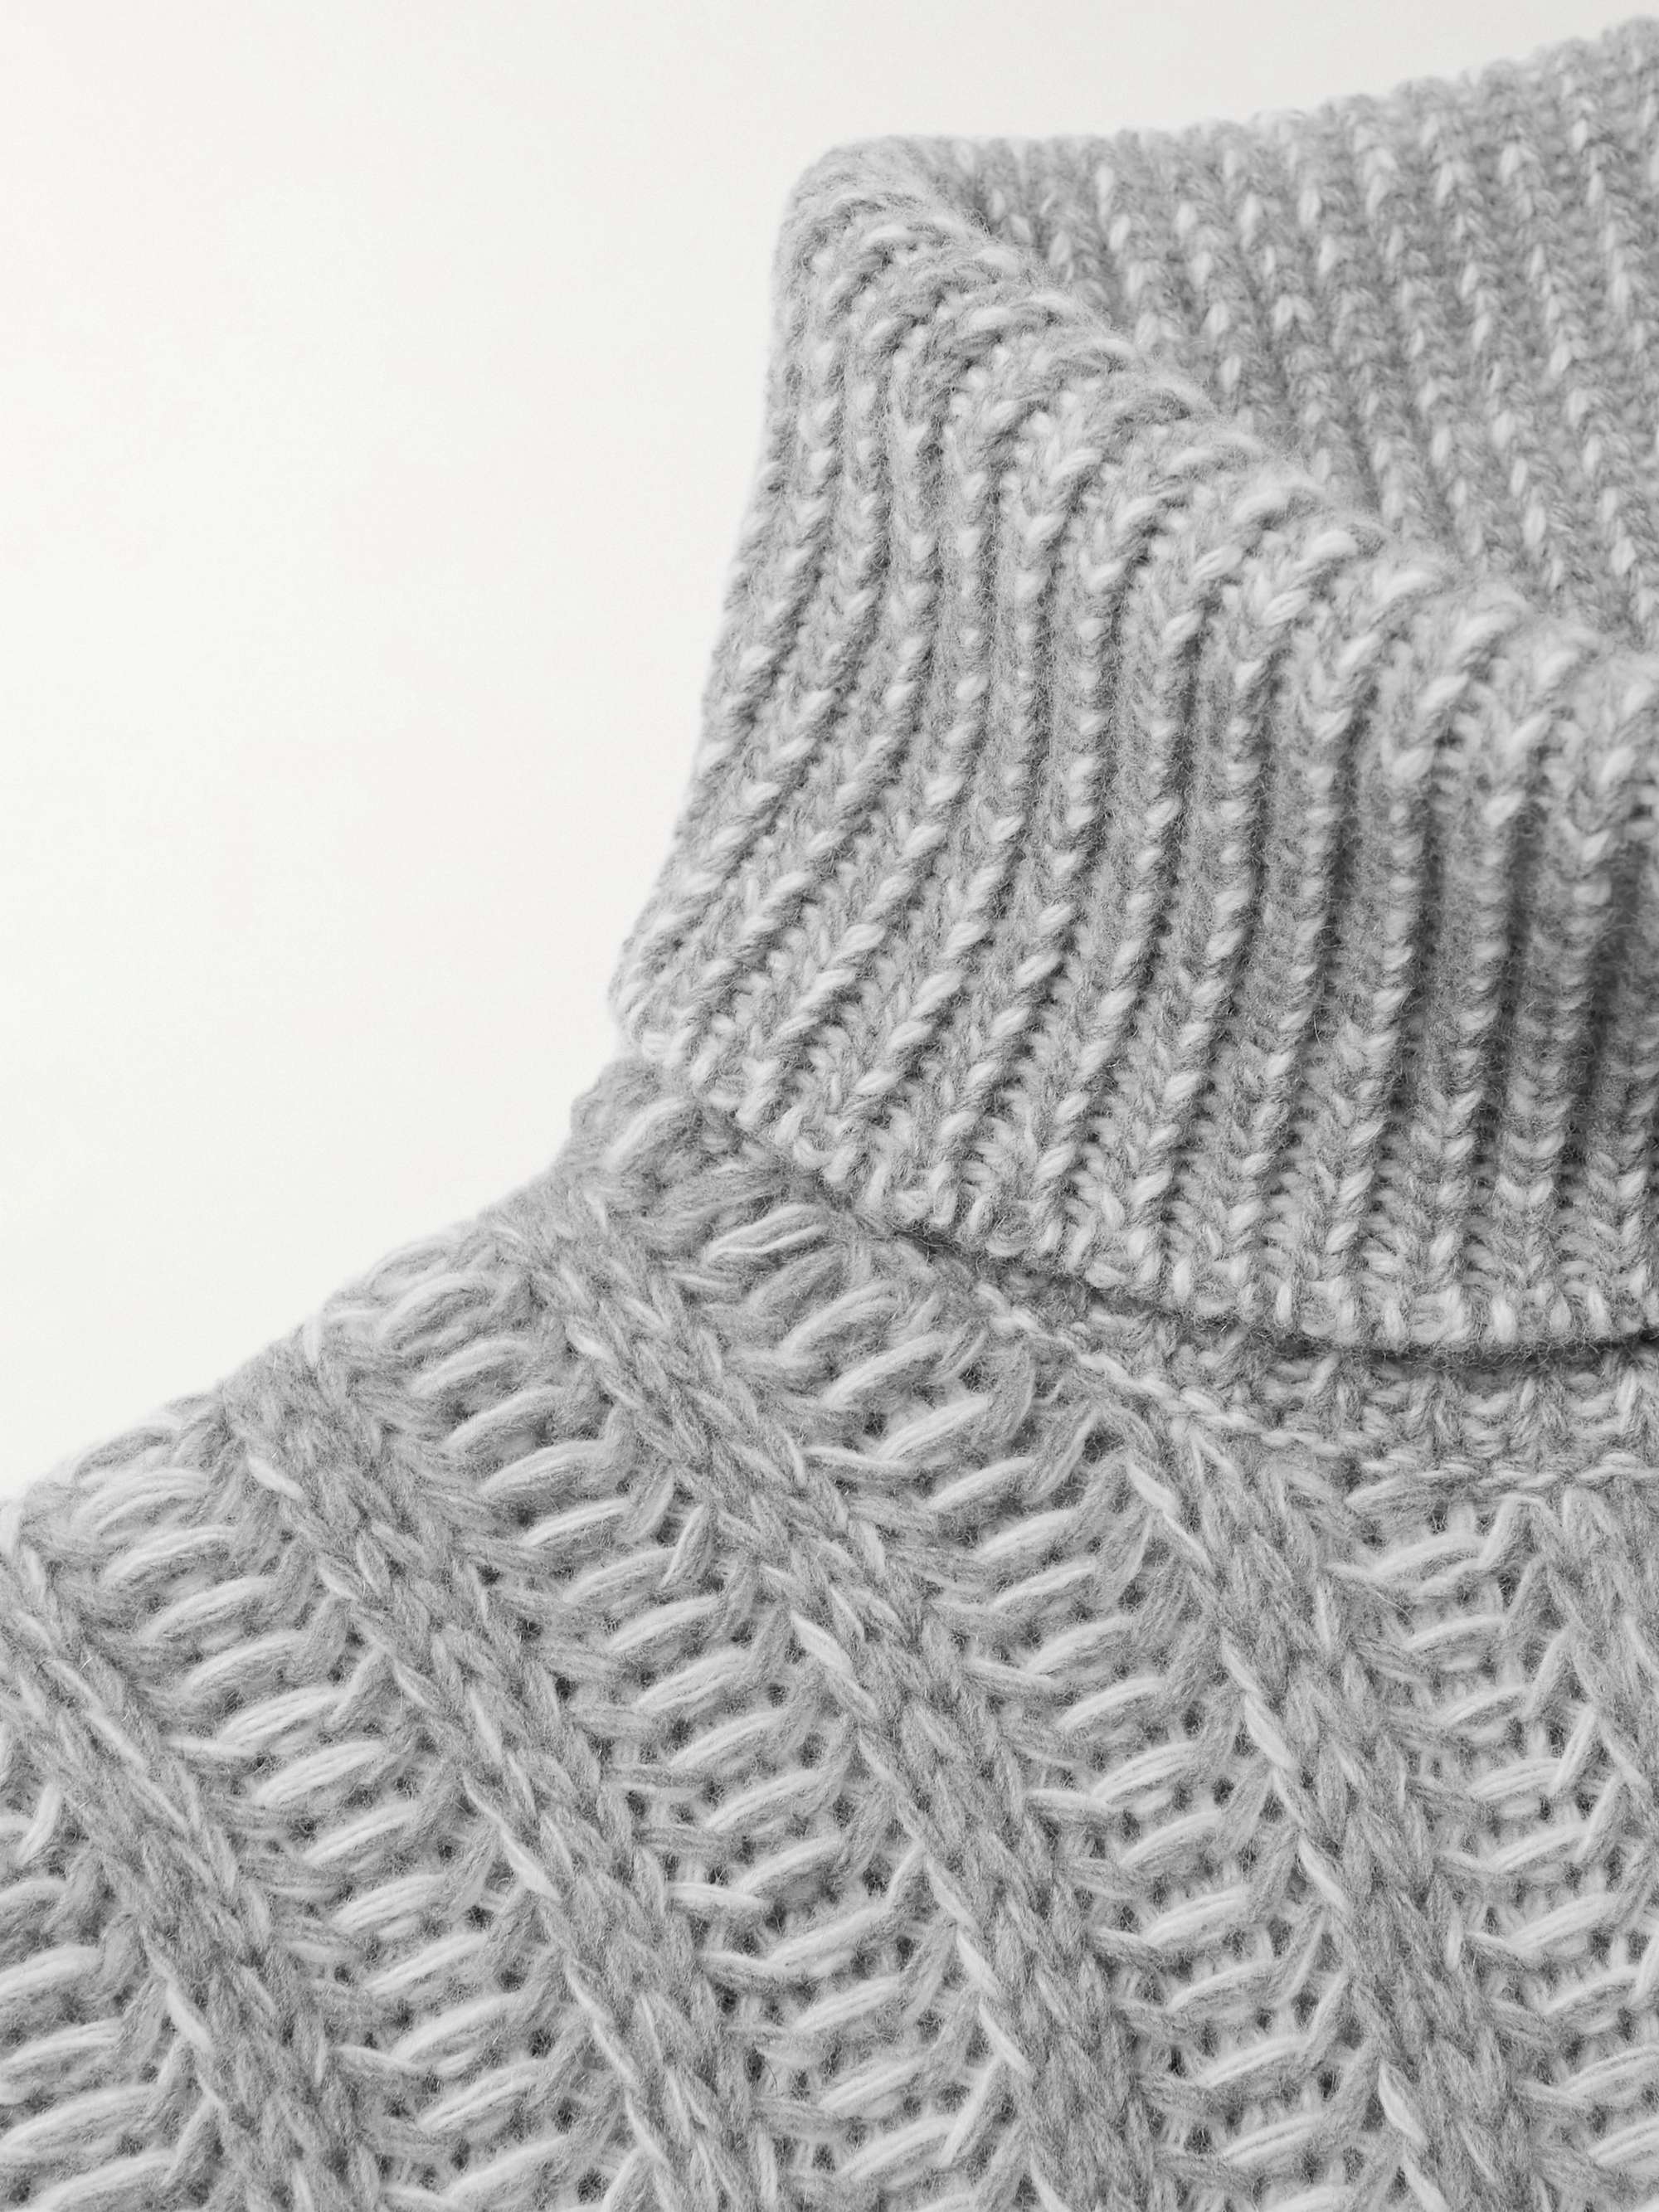 ALTEA Ribbed Virgin Wool and Cashmere-Blend Rollneck Sweater